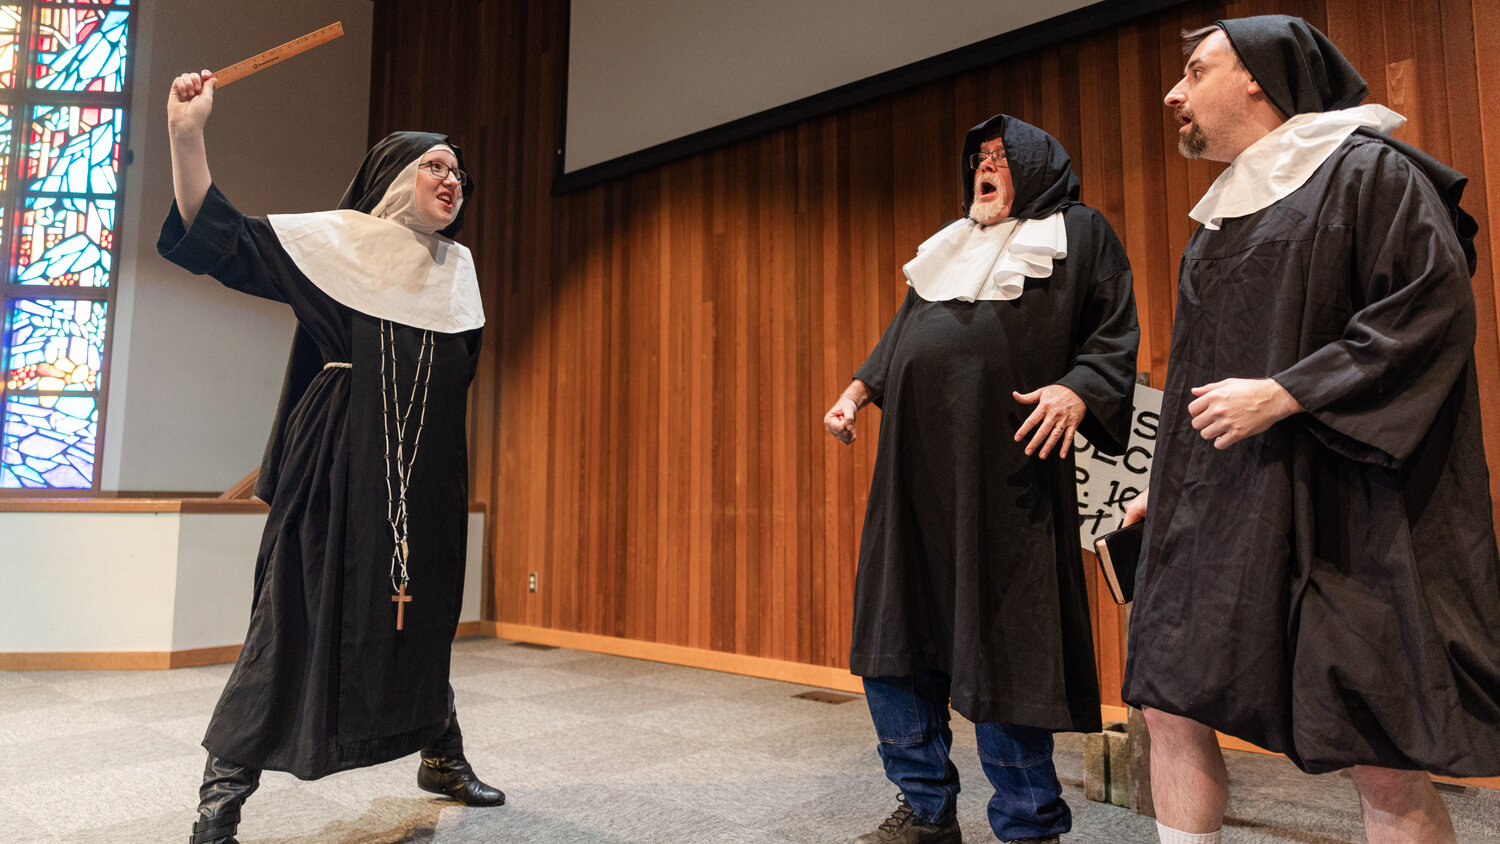 Gloria Wilcox as Sister Perpetua yells at Randy Humphreys as Hector Bogonzoles and Alex Johnson as Jake Headley as they perform on stage during dress rehearsals for the Christmas at Rattlesnake Gulch play at Mountain View Baptist Church in Centralia.